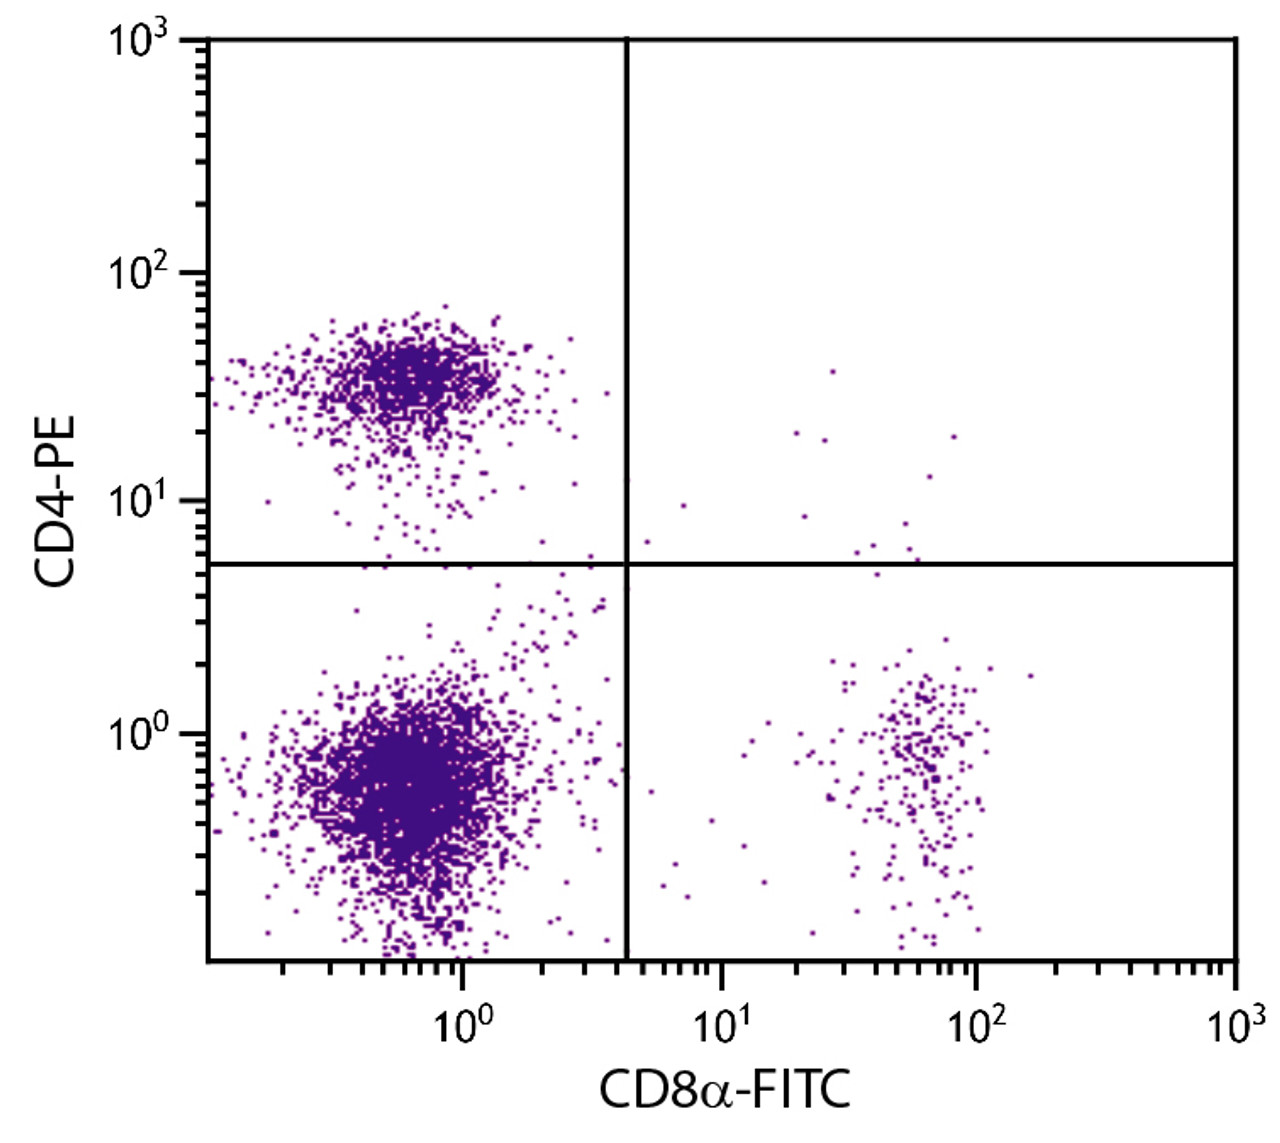 BALB/c mouse splenocytes were stained with Rat Anti-Mouse CD8?-FITC (Cat. No. 98-614) and Rat Anti-Mouse CD4-PE .